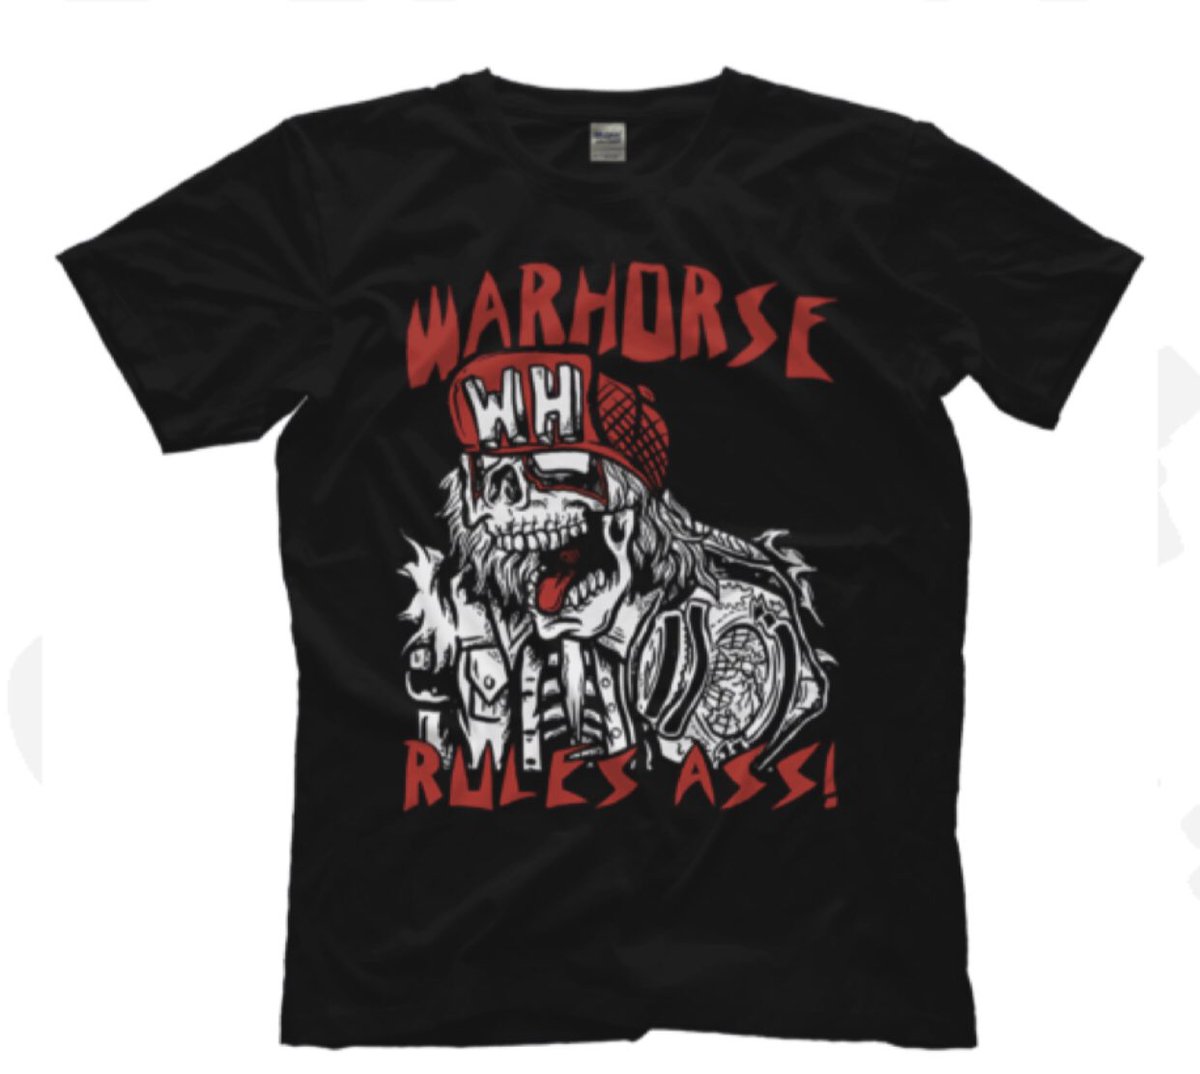 *THE WARHORSE MANIA WEEKEND MERCH TABLE EXPERIENCE*DAMN I’M TIRED, STILL HAVE 3 MATCHES THIS WEEKEND TOO. THANKS FOR STOPPING BY THE MERCH TABLE. I BROUGHT THESE DESIGNS BUT I HAVE MORE OVER ON PWTEES ( https://www.prowrestlingtees.com/wrestler-t-shirts/warhorse.html)